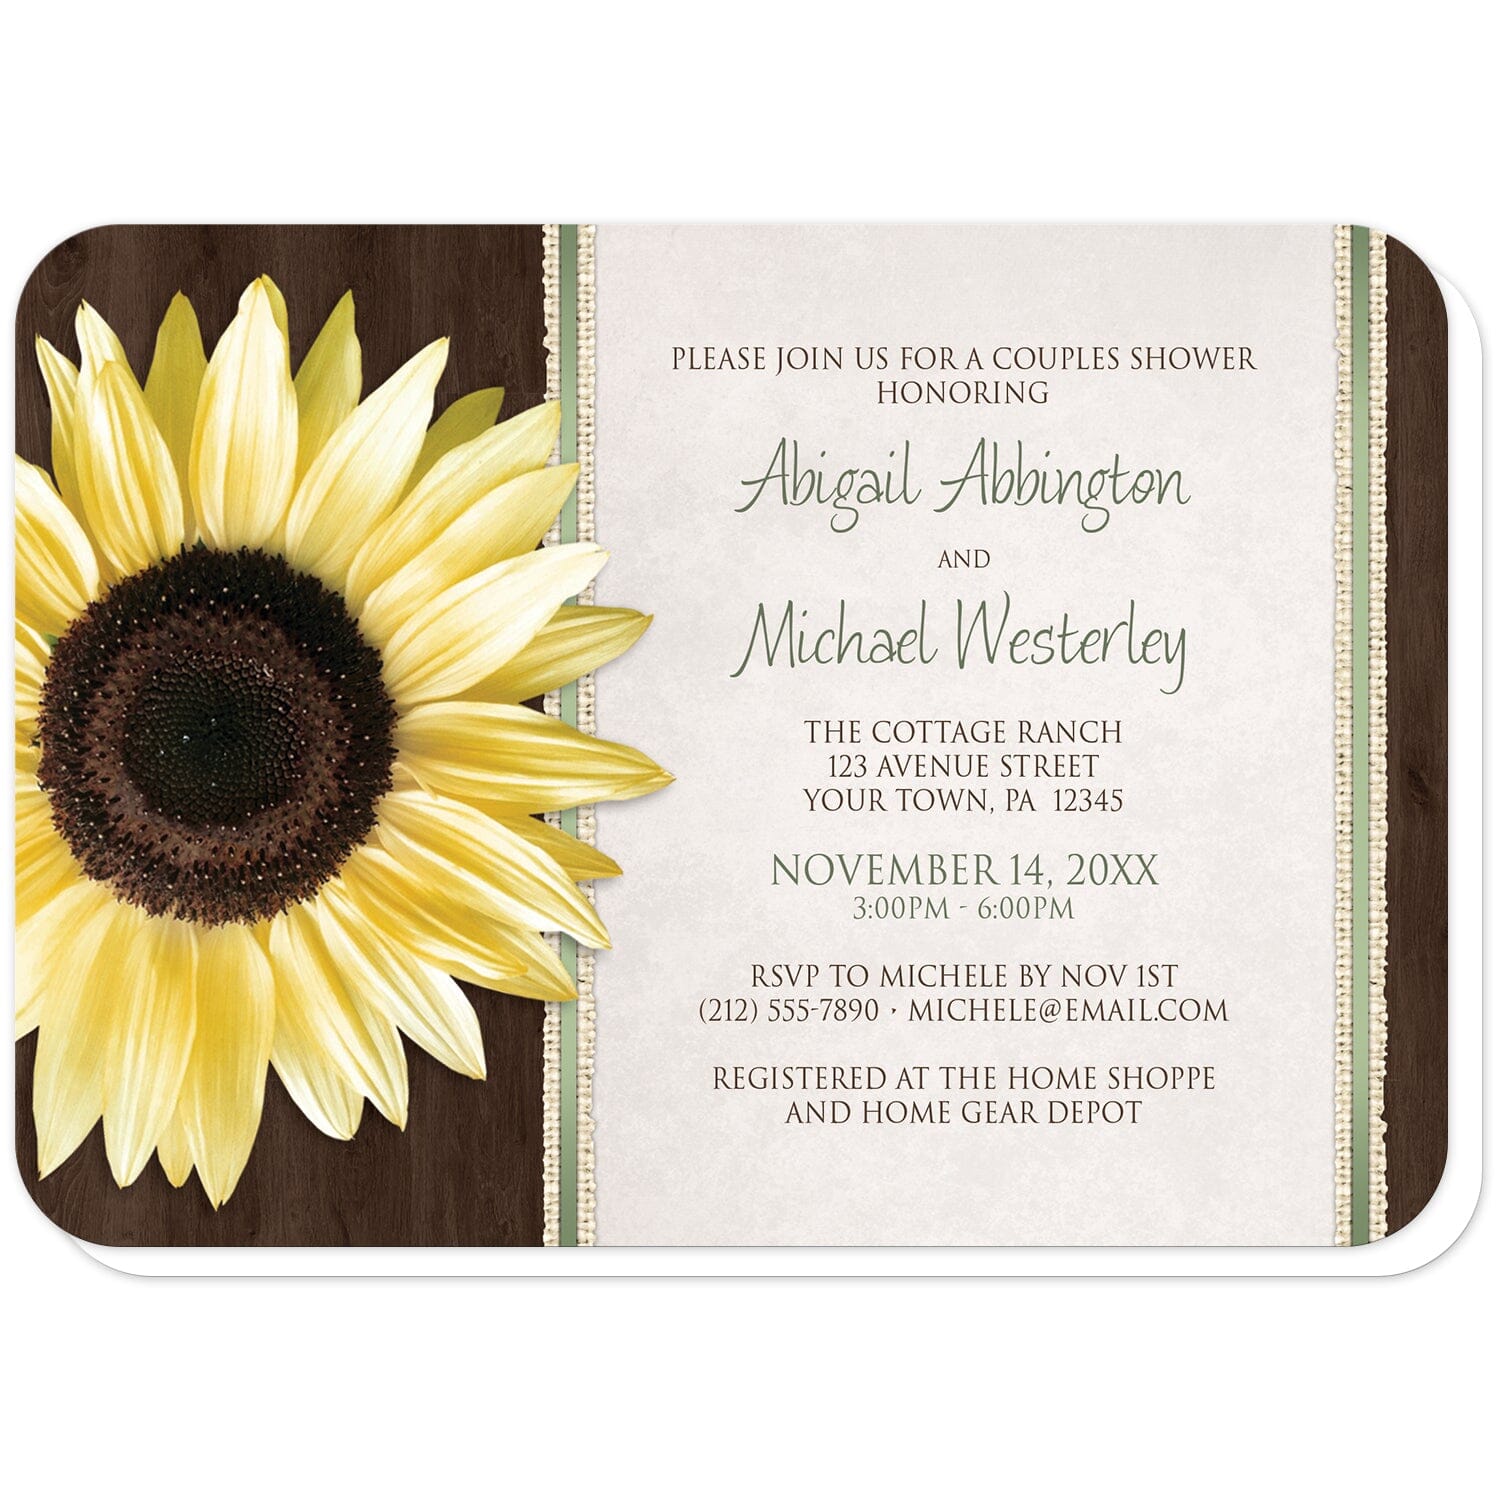 Country Sunflower Wood Brown Green Couples Shower Invitations (with rounded corners) at Artistically Invited. Country sunflower wood brown green couples shower invitations in a floral southern style, with a big yellow sunflower over a dark brown wood pattern illustration on the left side. Your personalized wedding shower celebration details are custom printed in green and brown over a beige parchment design to the right of the sunflower, outlined vertically by burlap strips and green stripes.